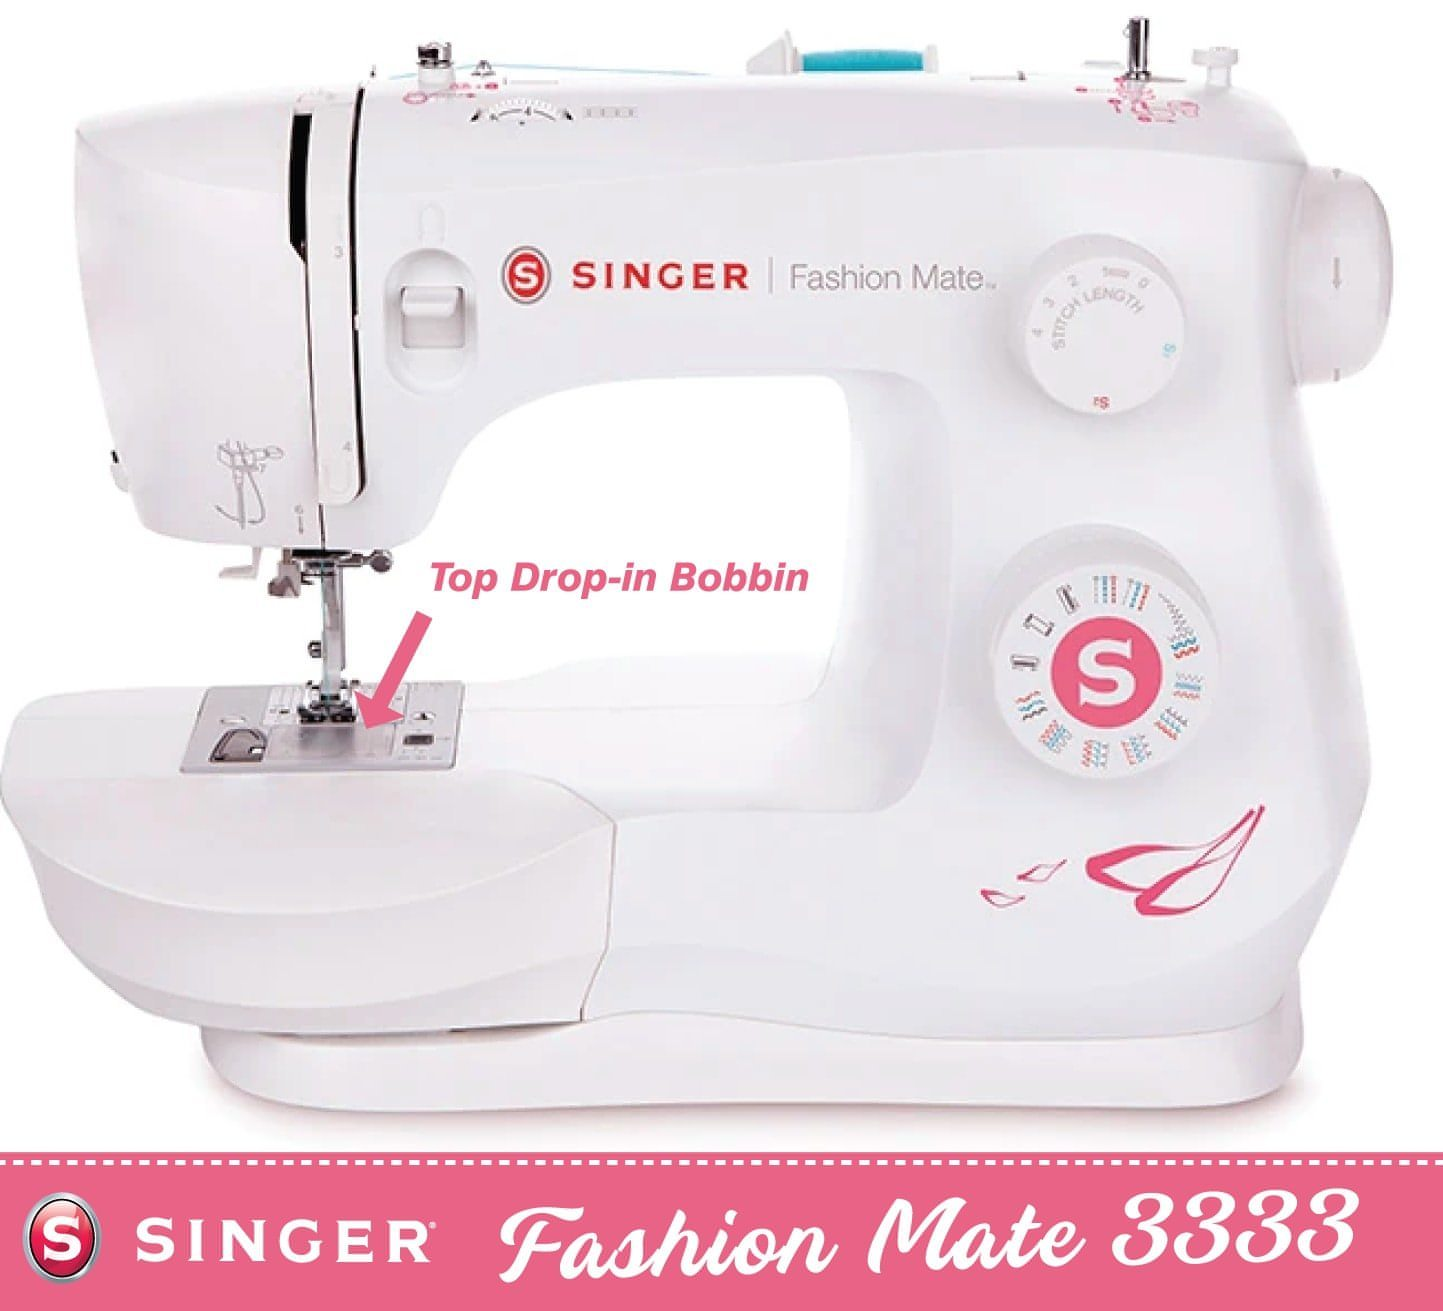 Singer Fashion Mate 3333 Sewing Machine - Latest style drop in bobbin system